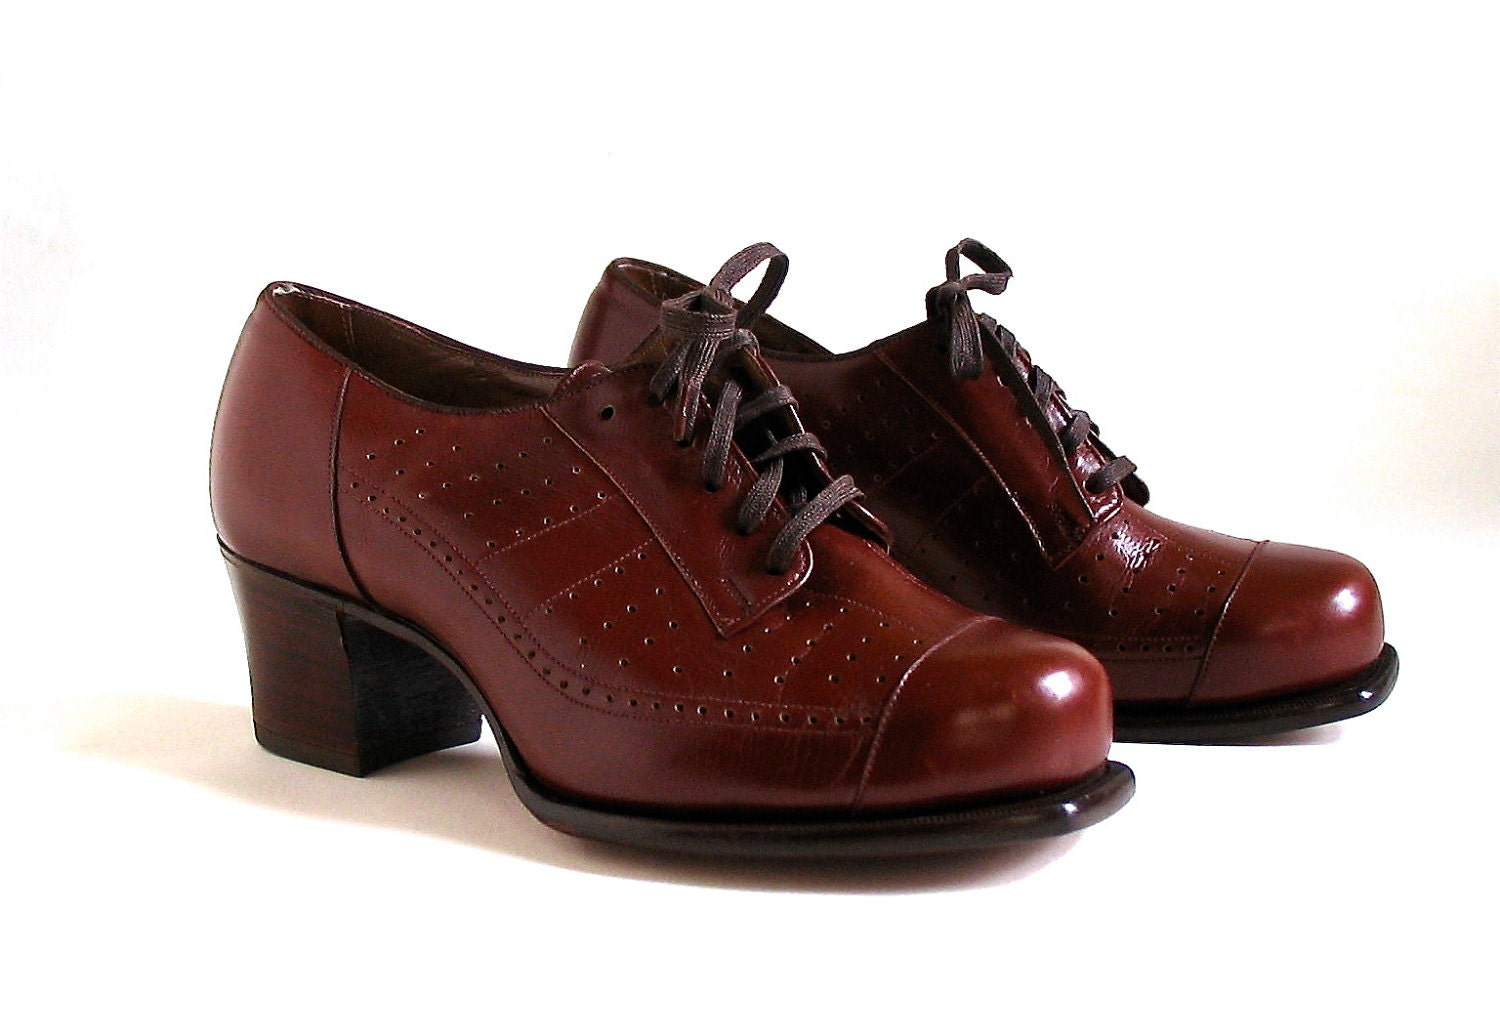 Vintage Women Shoes Oxford Lace-Up's Unworn by bootsiesvintage